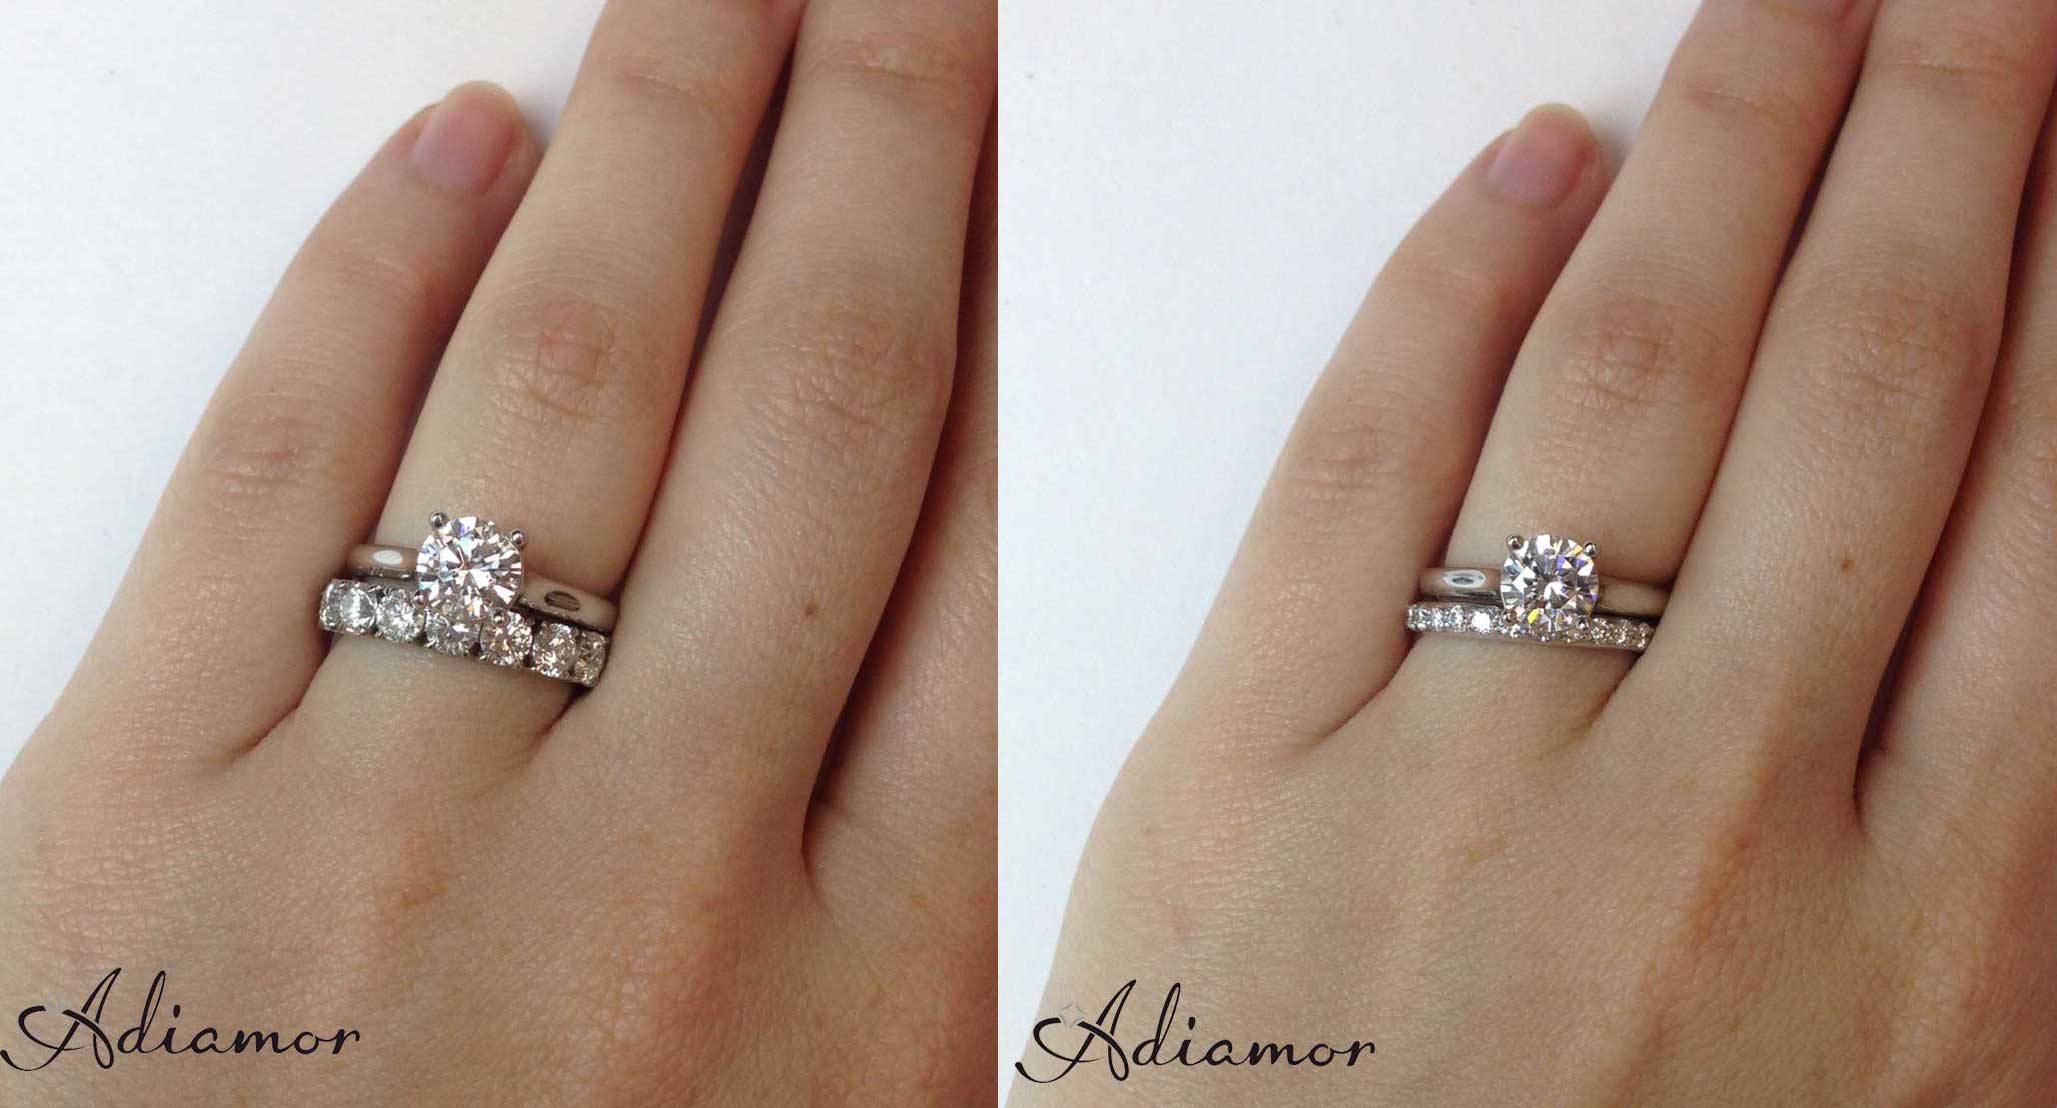 Solitaire engagement ring and wedding band